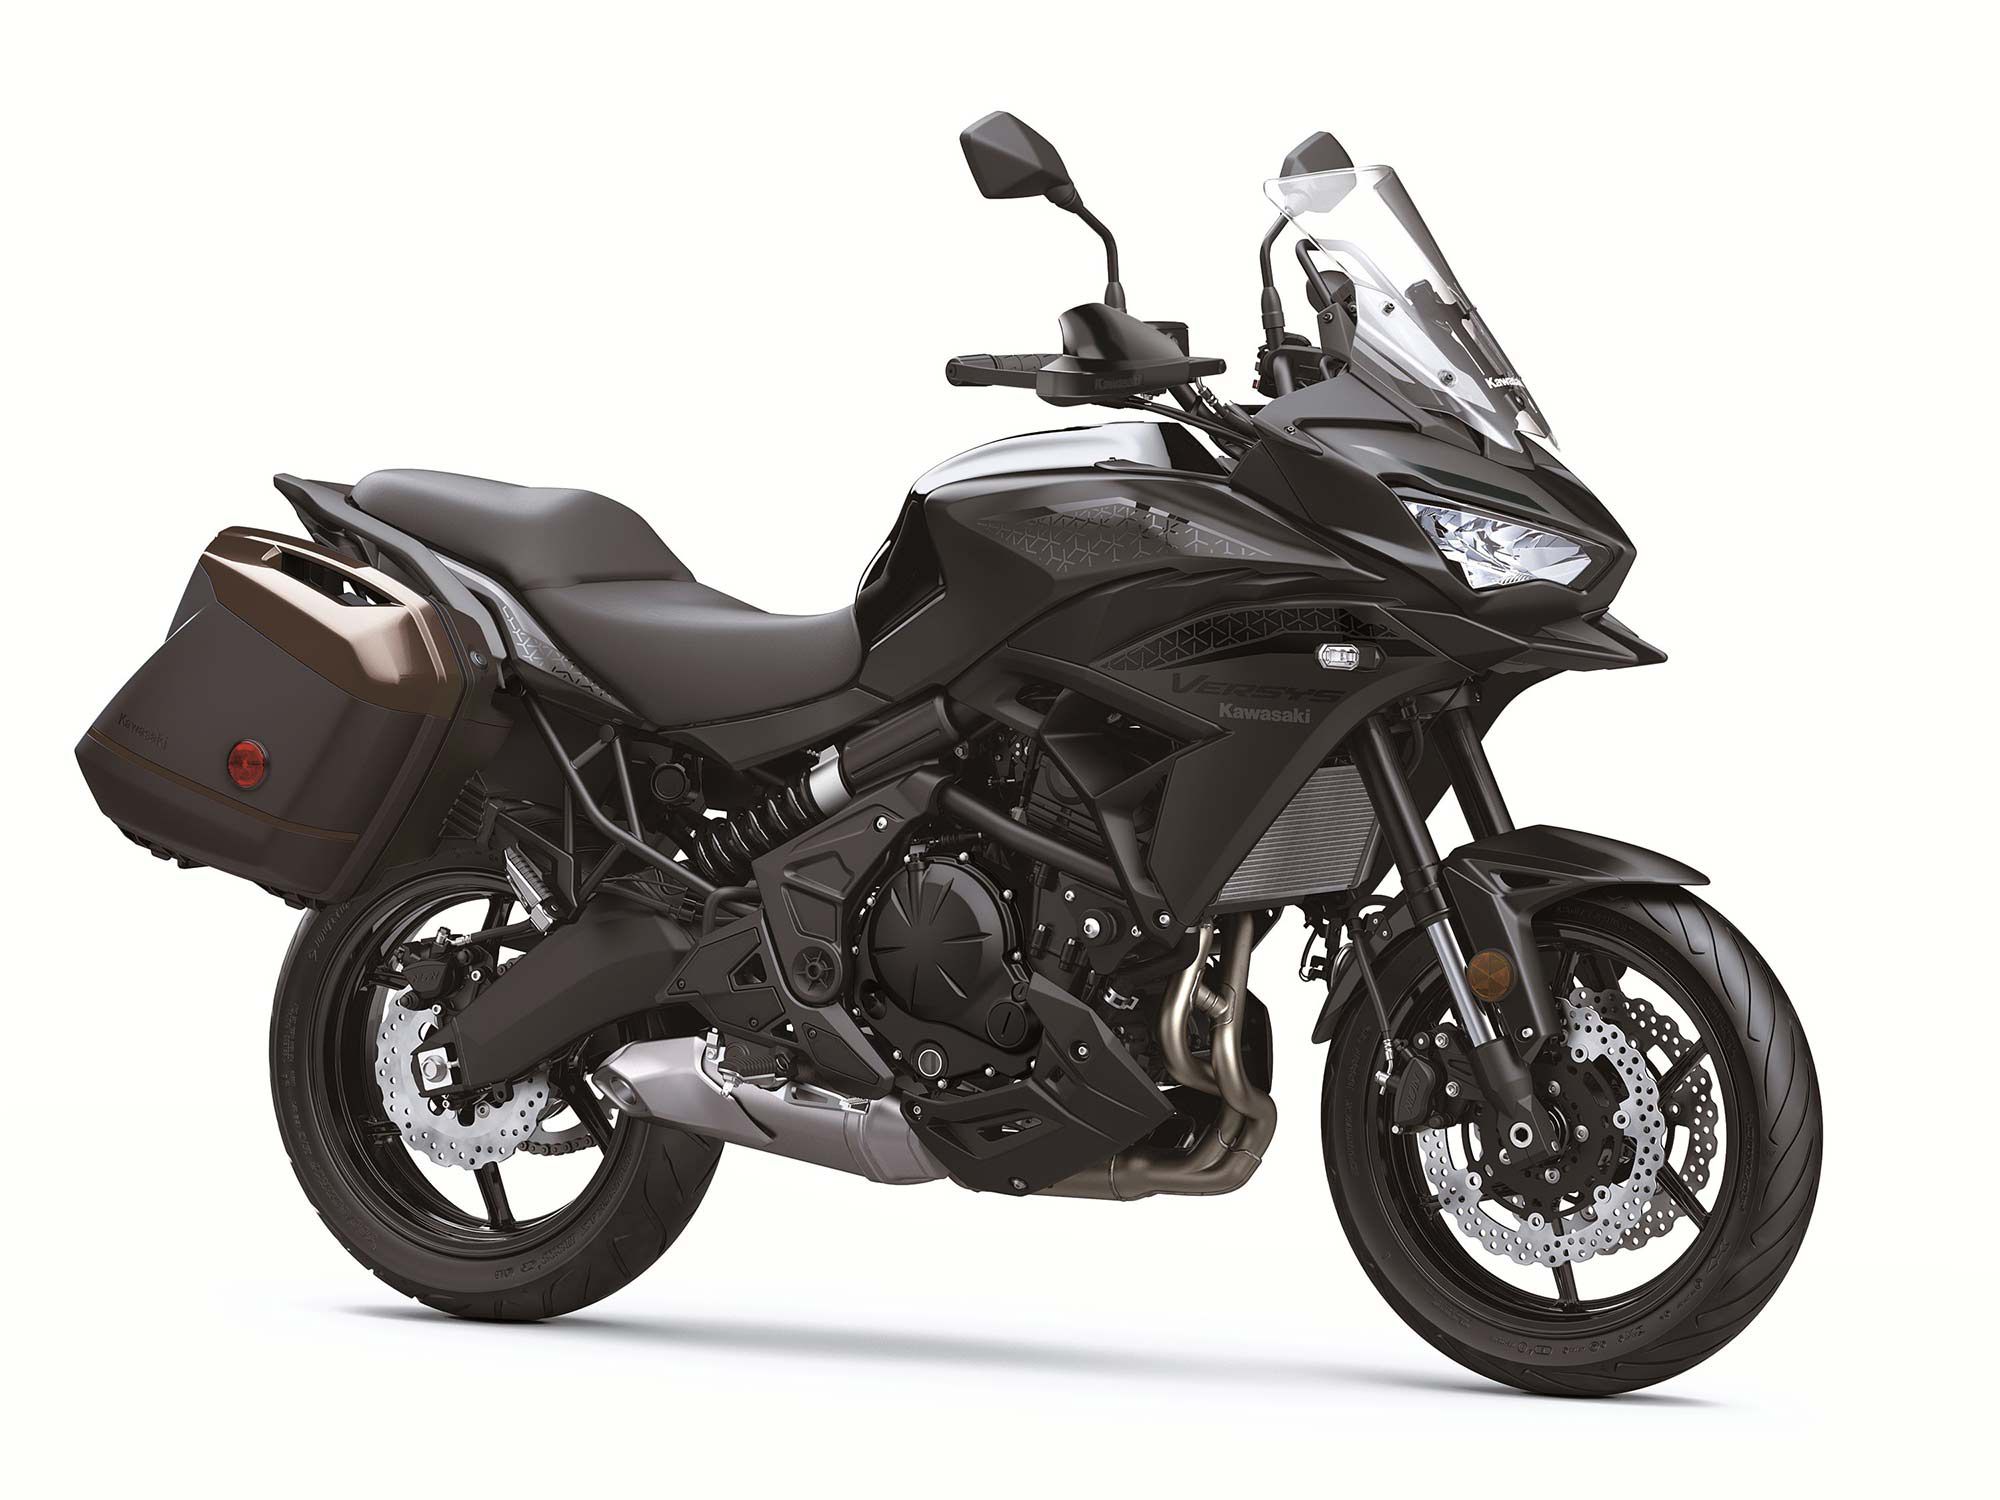 The front end of the Versys 650 sees many changes in 2022, including a sharper front cowl, LED headlights, new dash, and a four-way-adjustable windscreen.